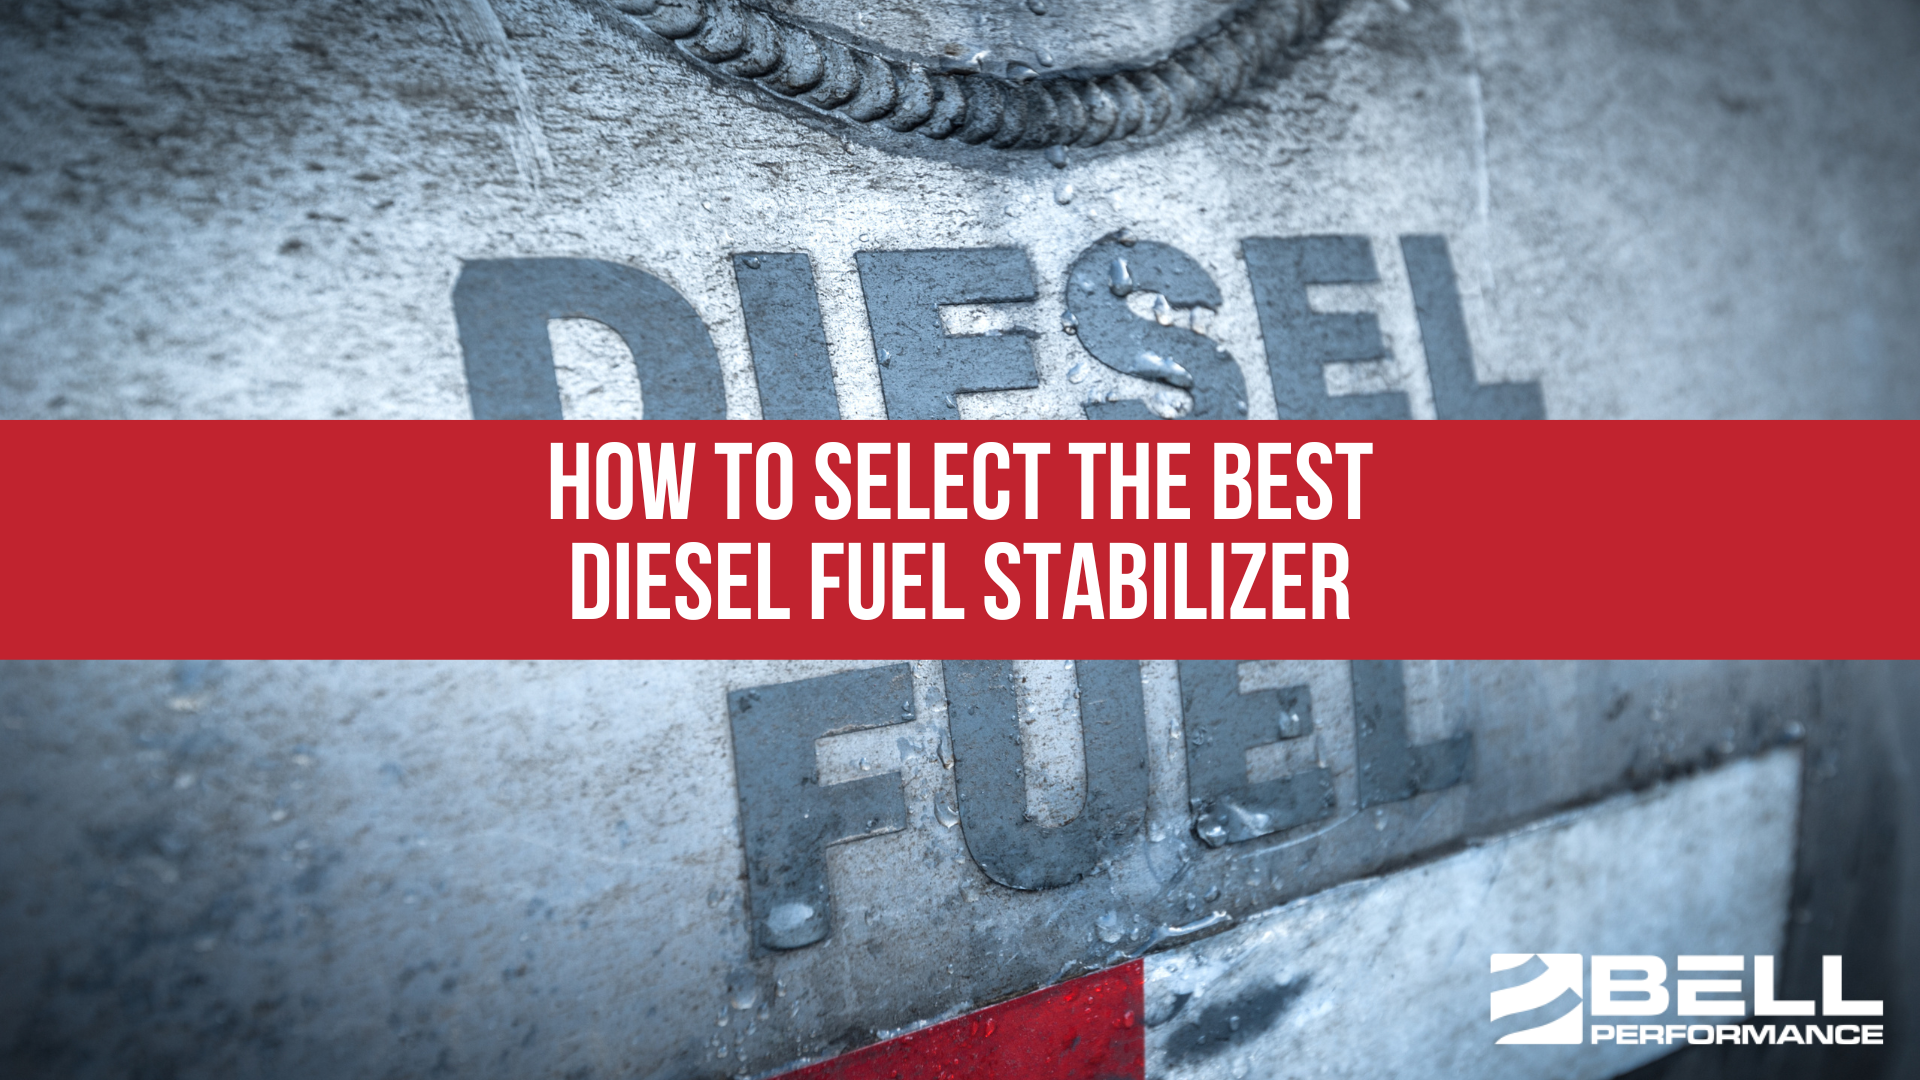 How to Select the Best Diesel Fuel Stabilizer